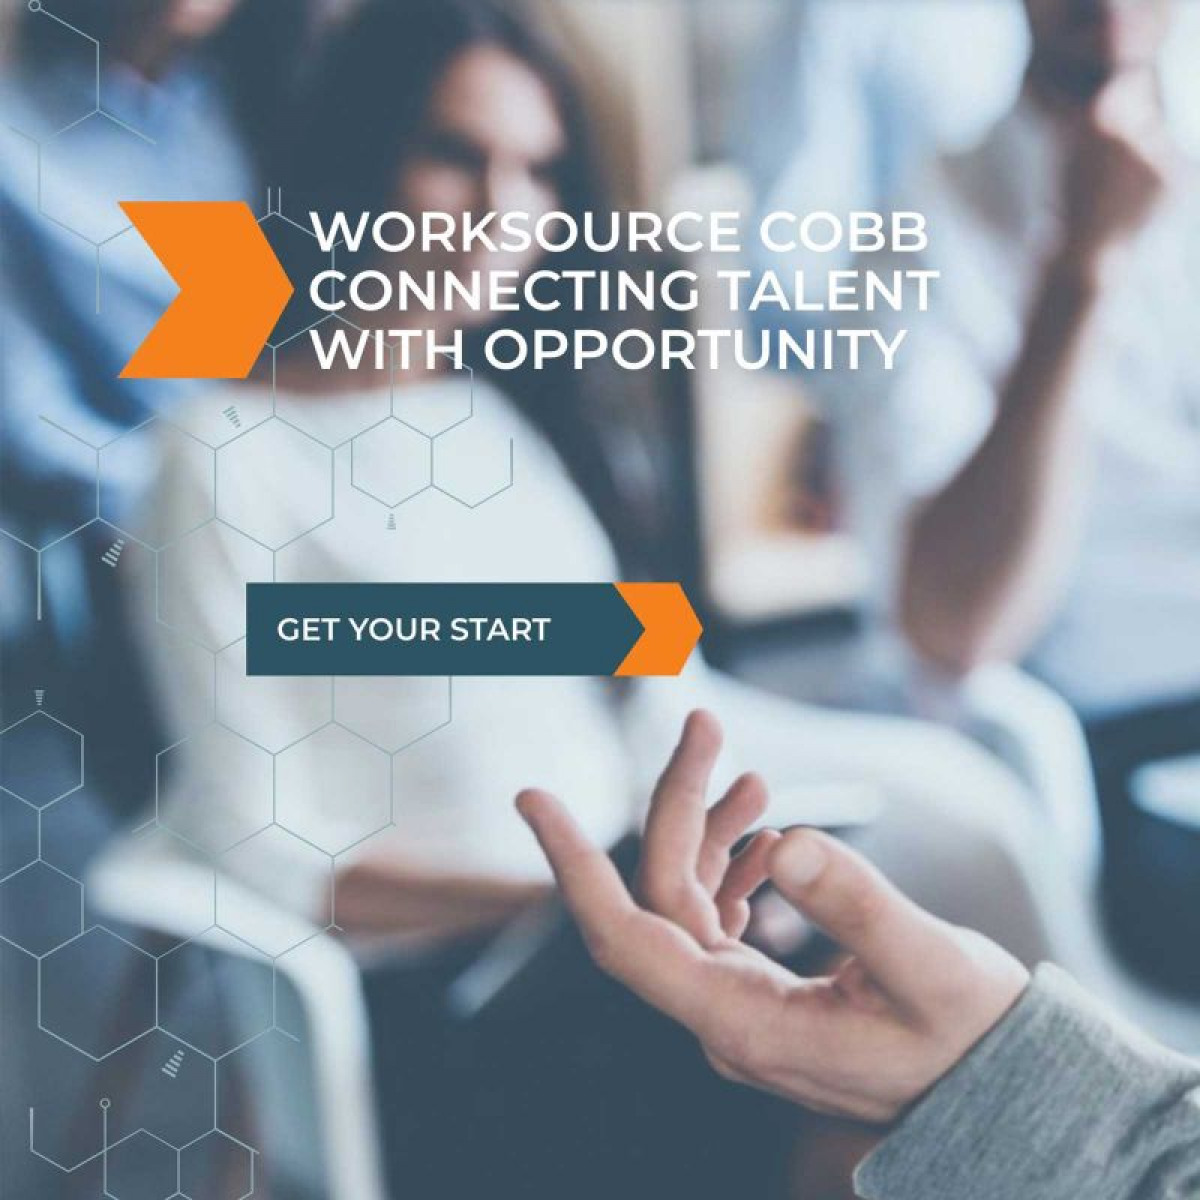 Image of website for WorkSource Cobb